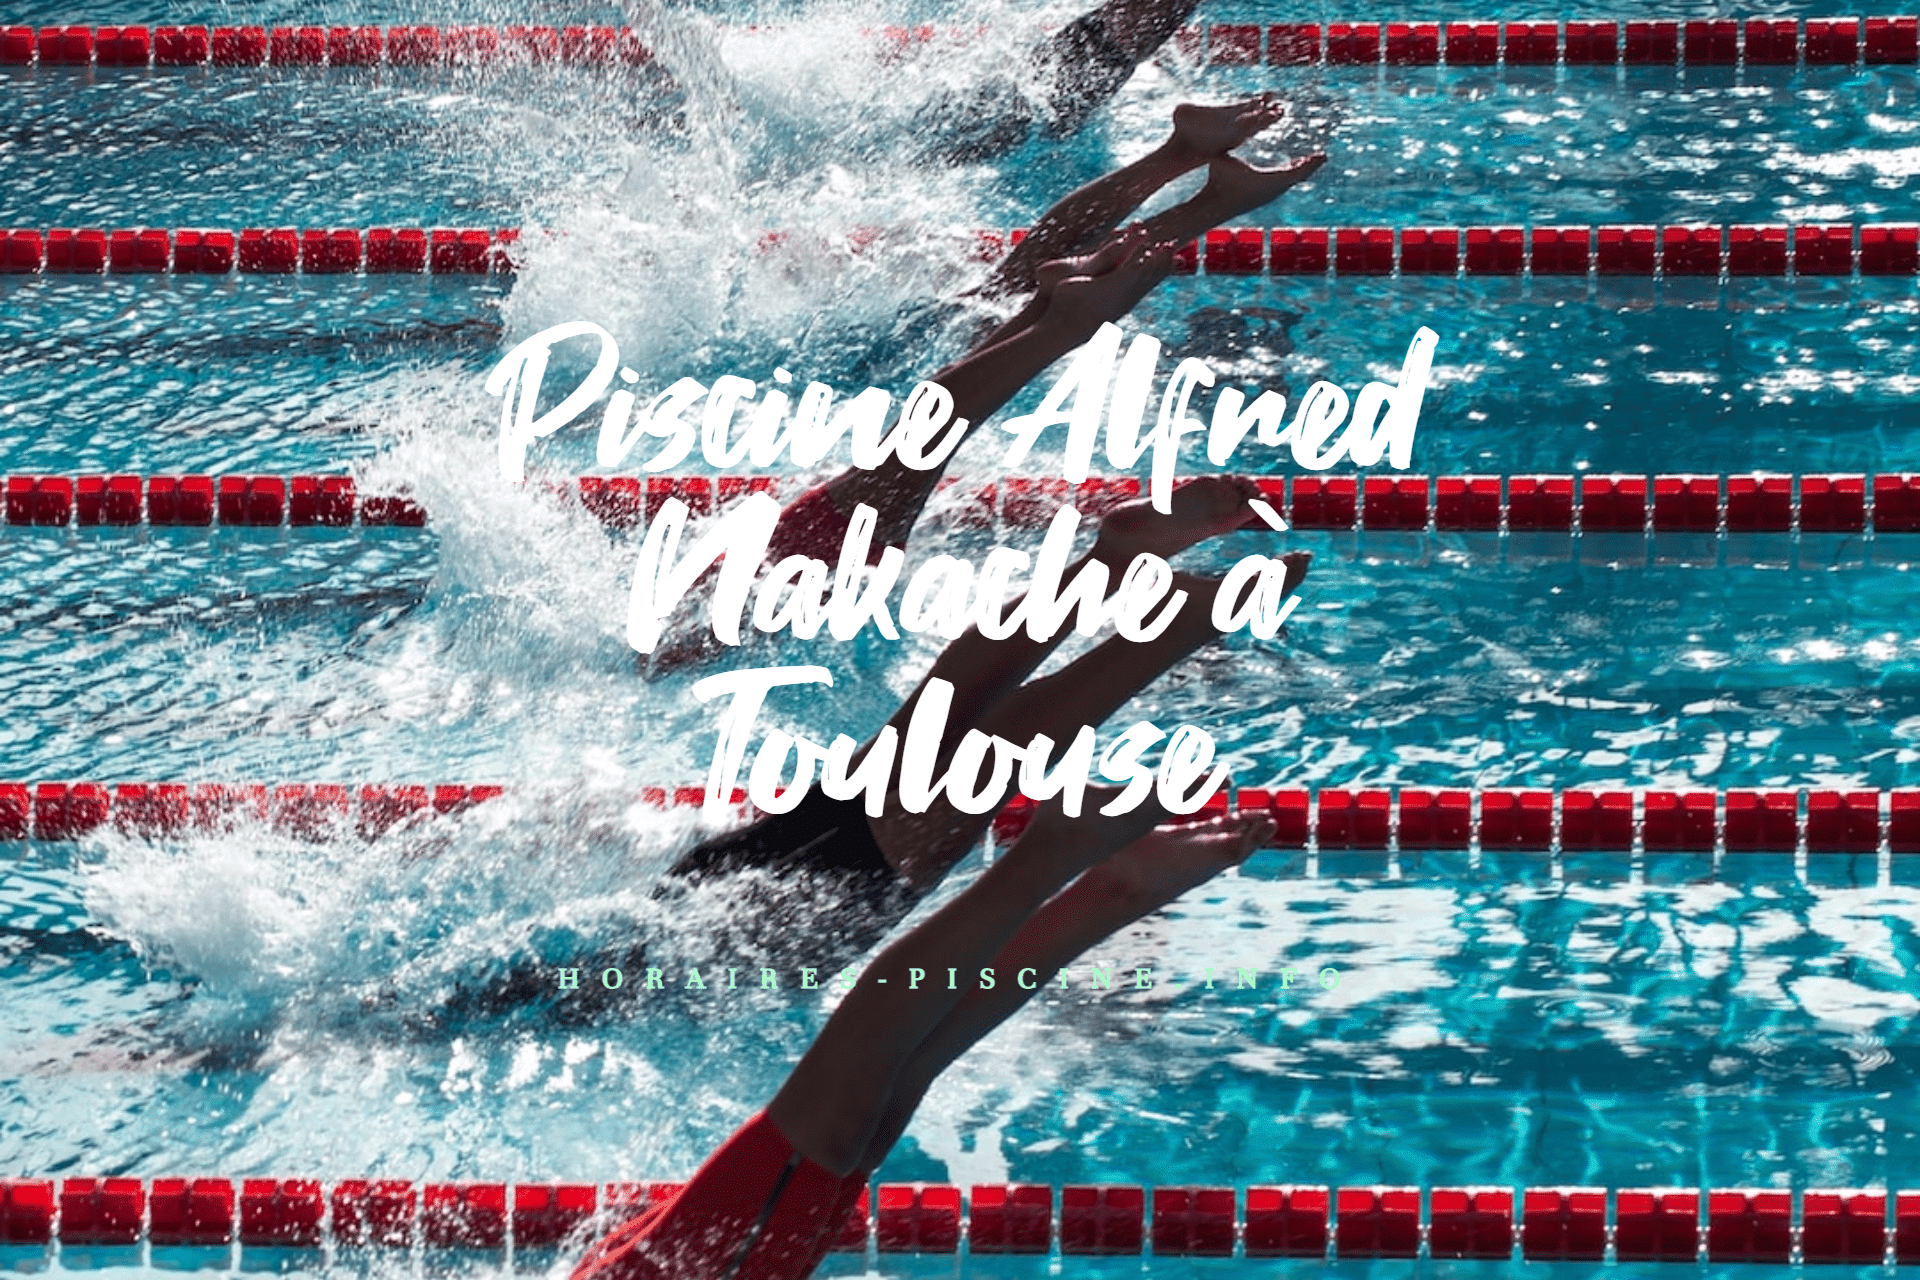 Piscine Alfred Nakache à Toulouse